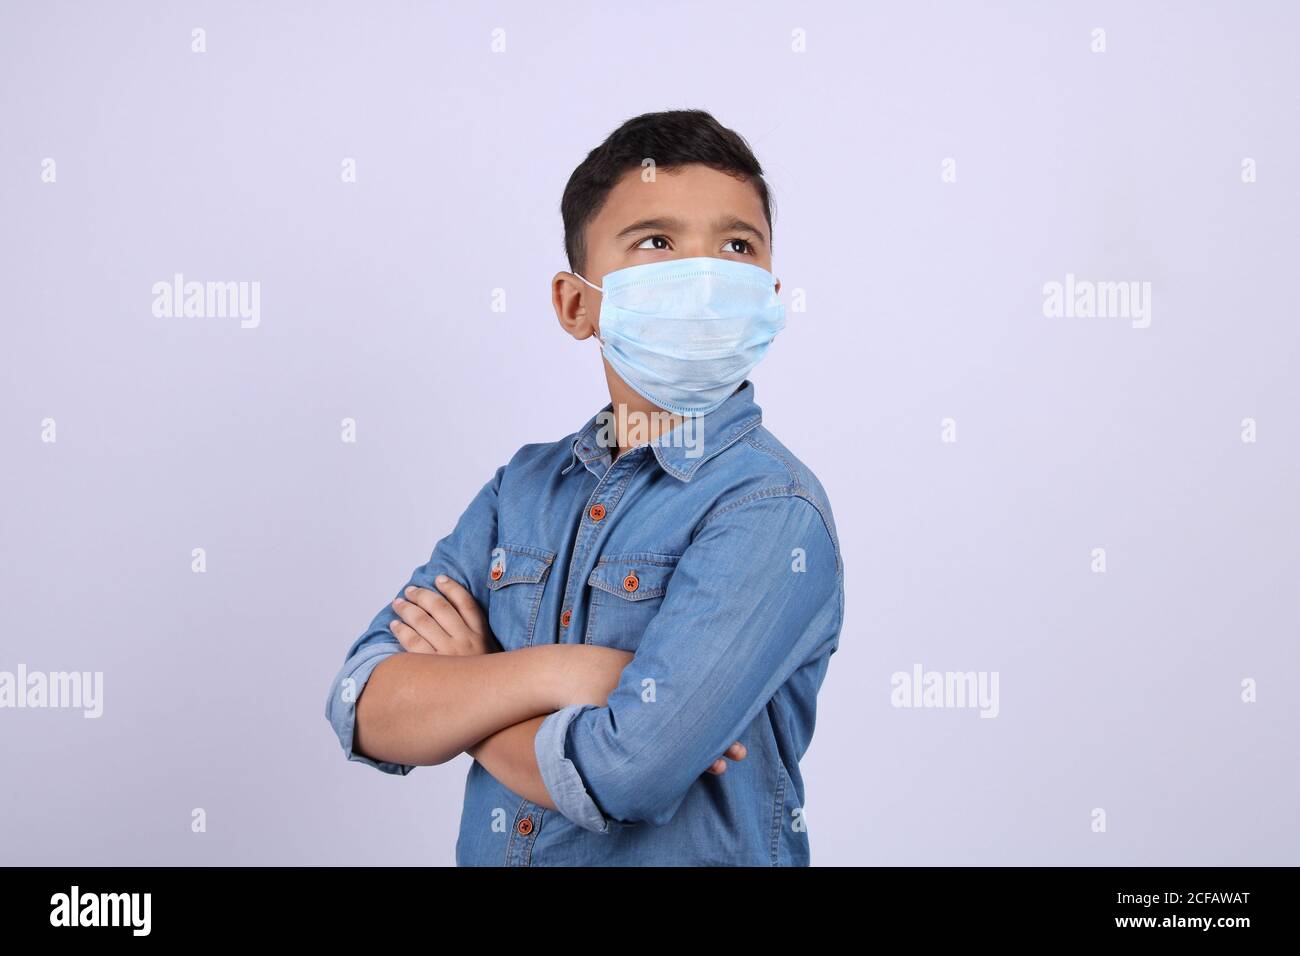 Cute little Indian boy with folded hands wearing surgical mask, looking up, isolated over white background Stock Photo